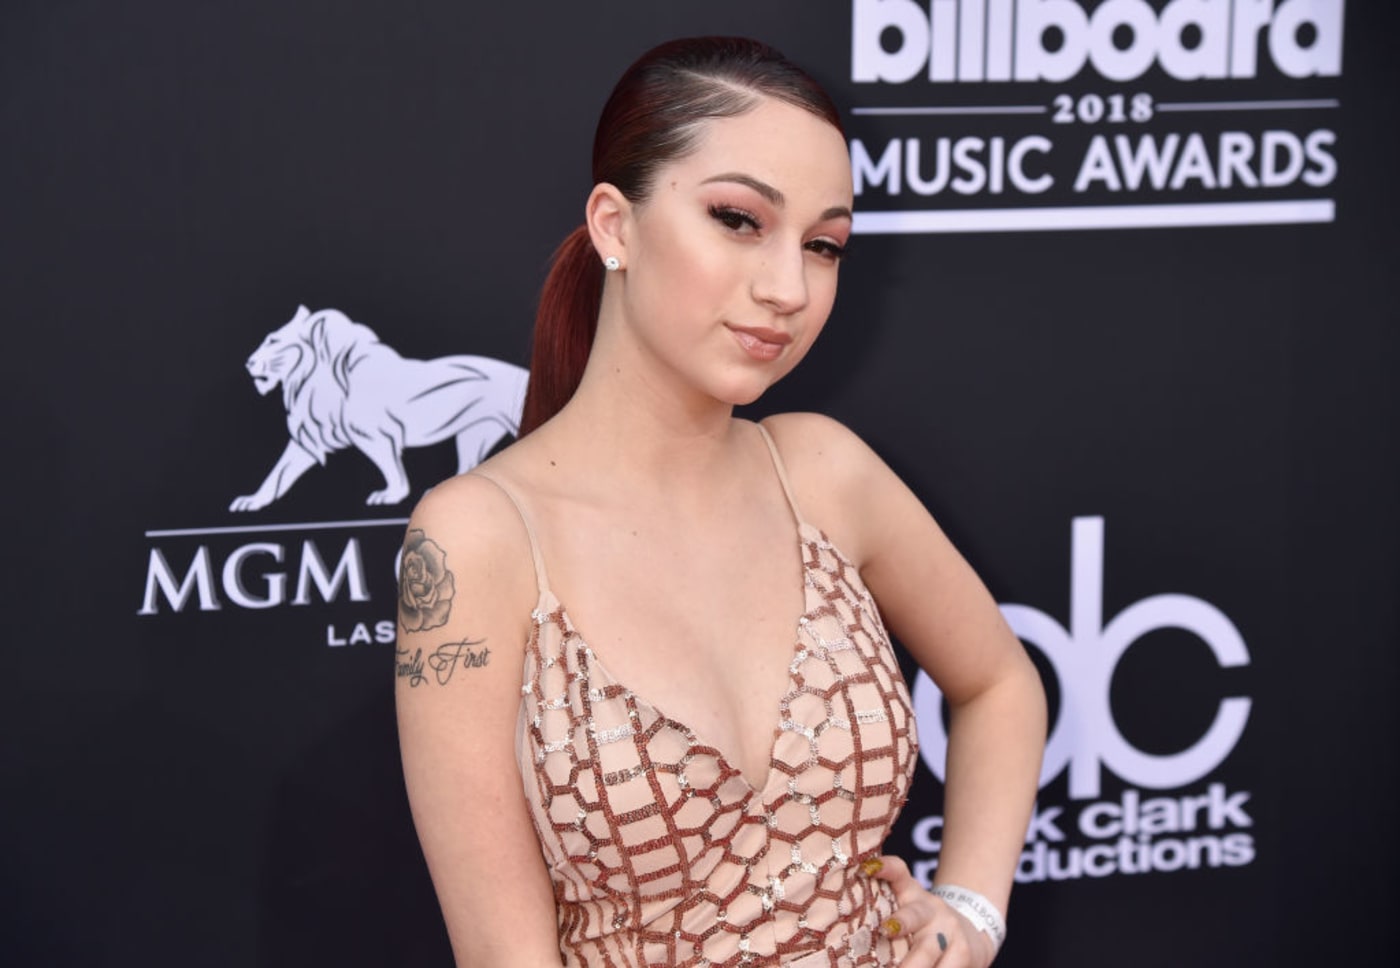 Bhad Bhabie on the red carpet